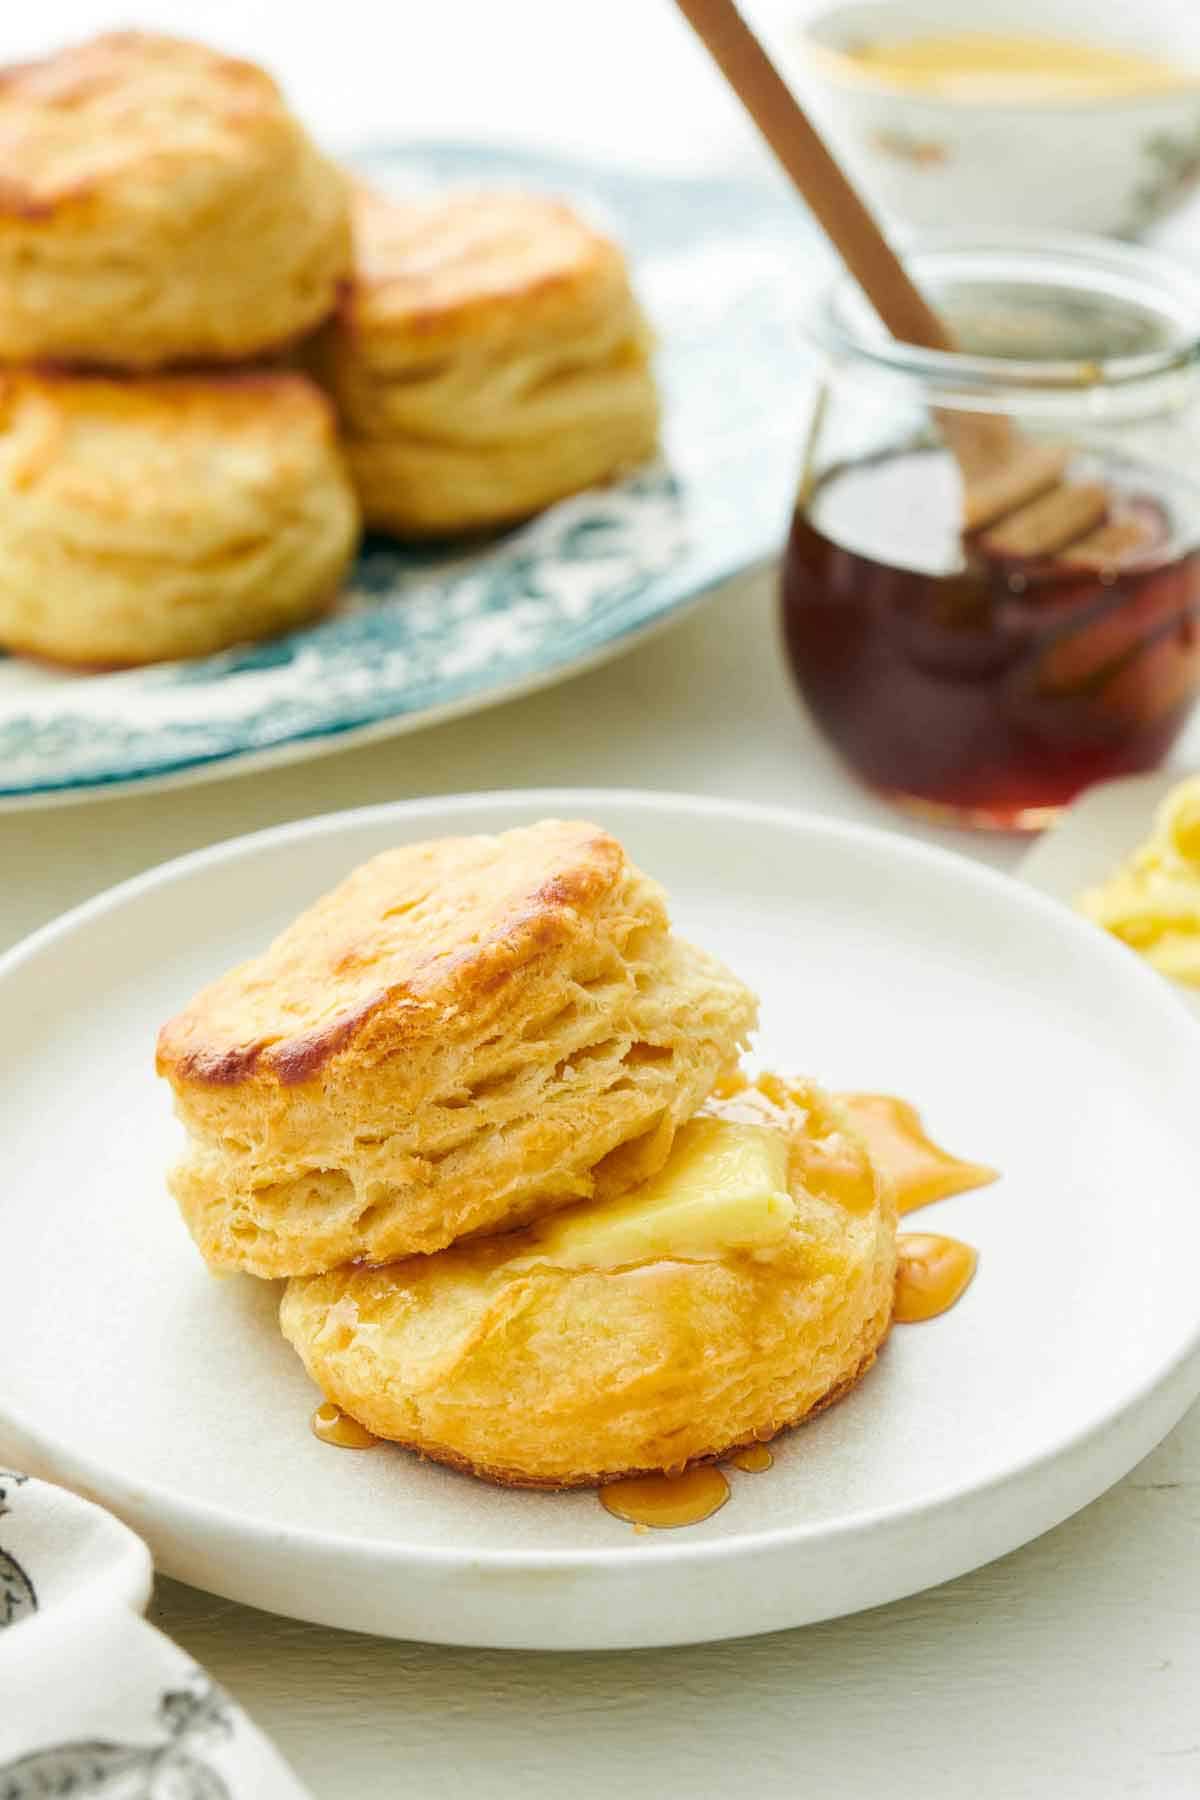 A plate with buttermilk biscuits with some honey and butter. A jar of honey in the background and more biscuits.